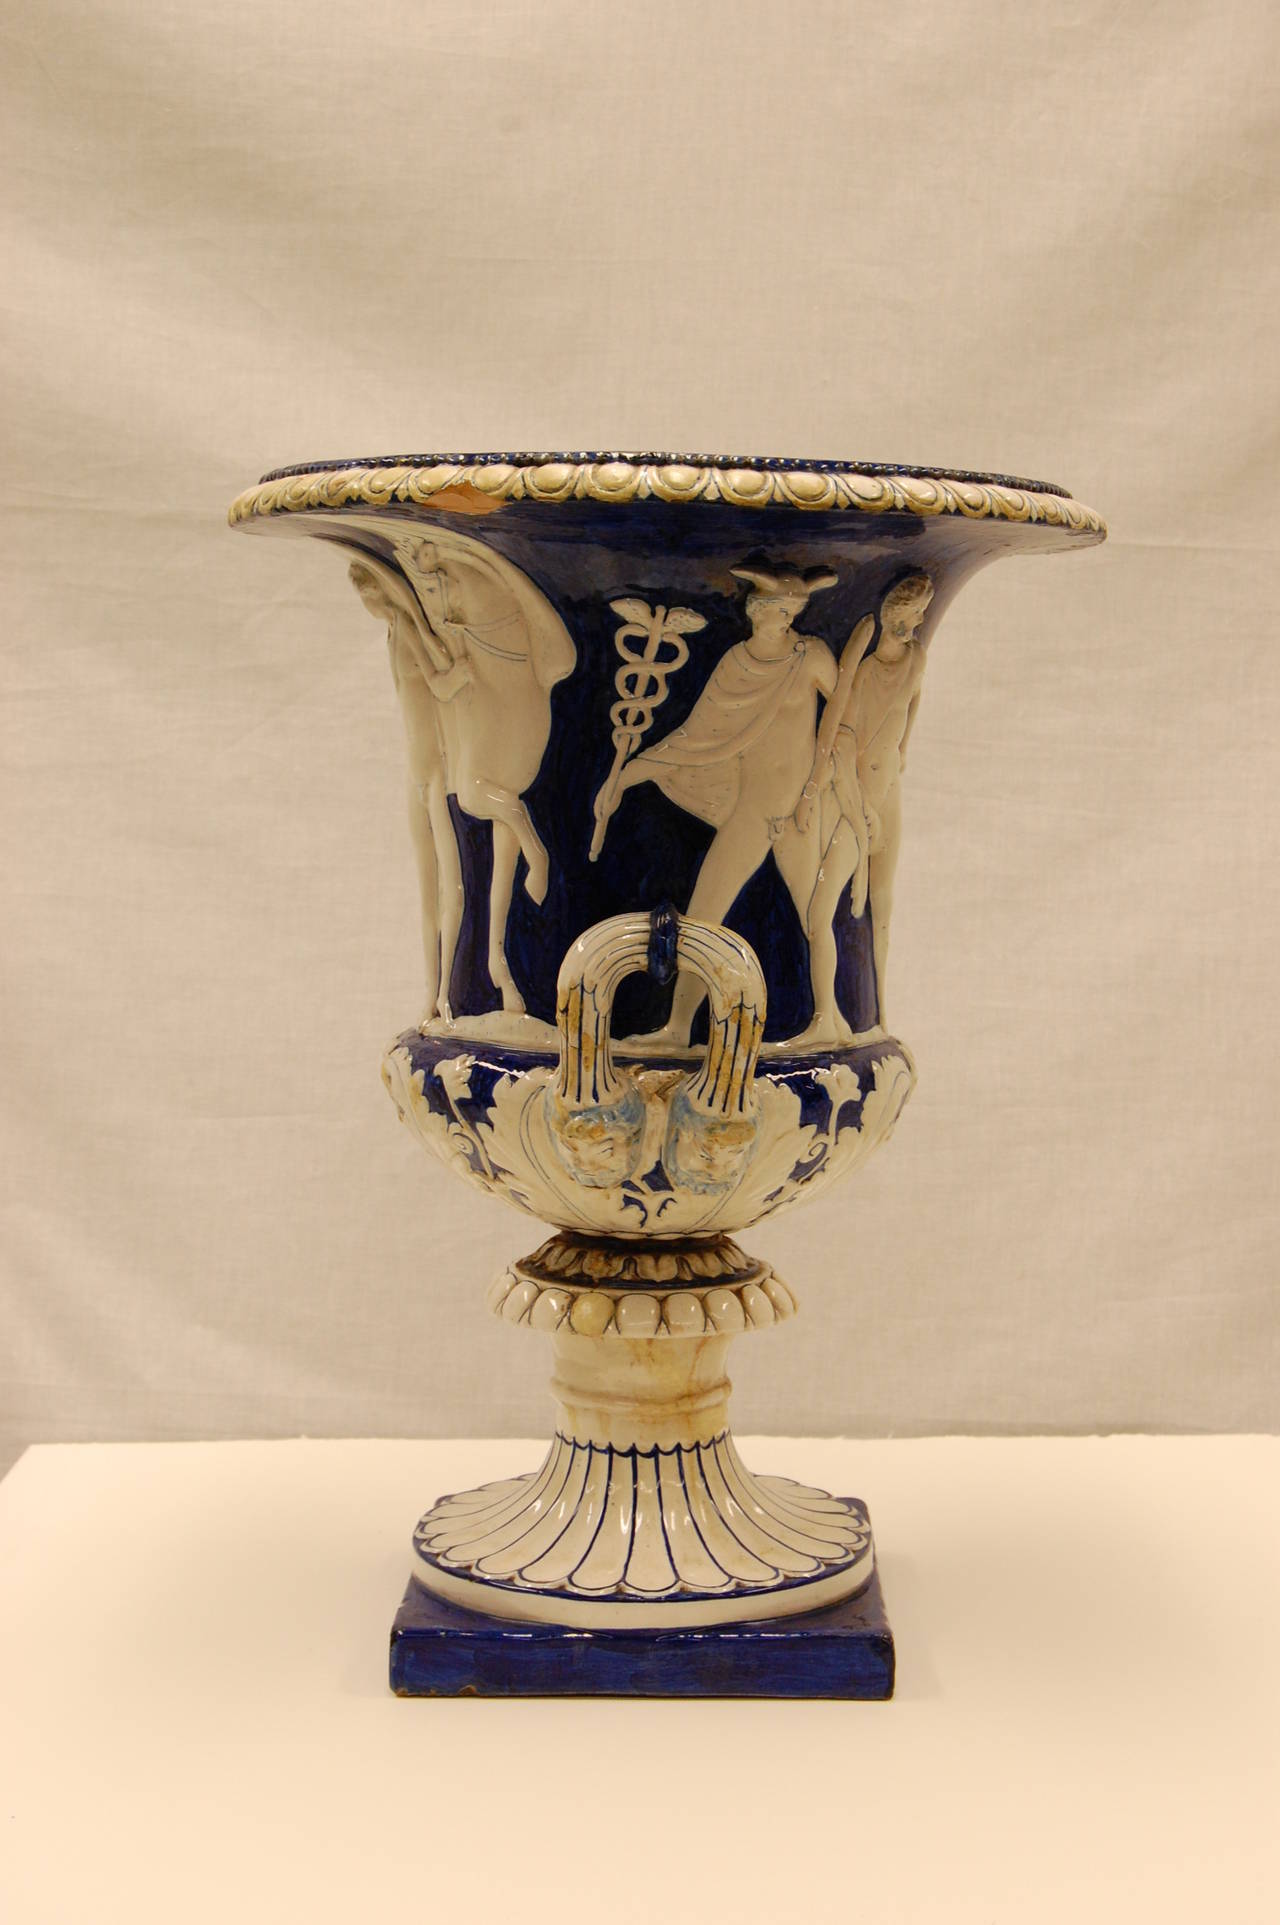 Classical Roman Antique Classically Inspired Majolica Urn in a Blue and White Glazed Finish For Sale